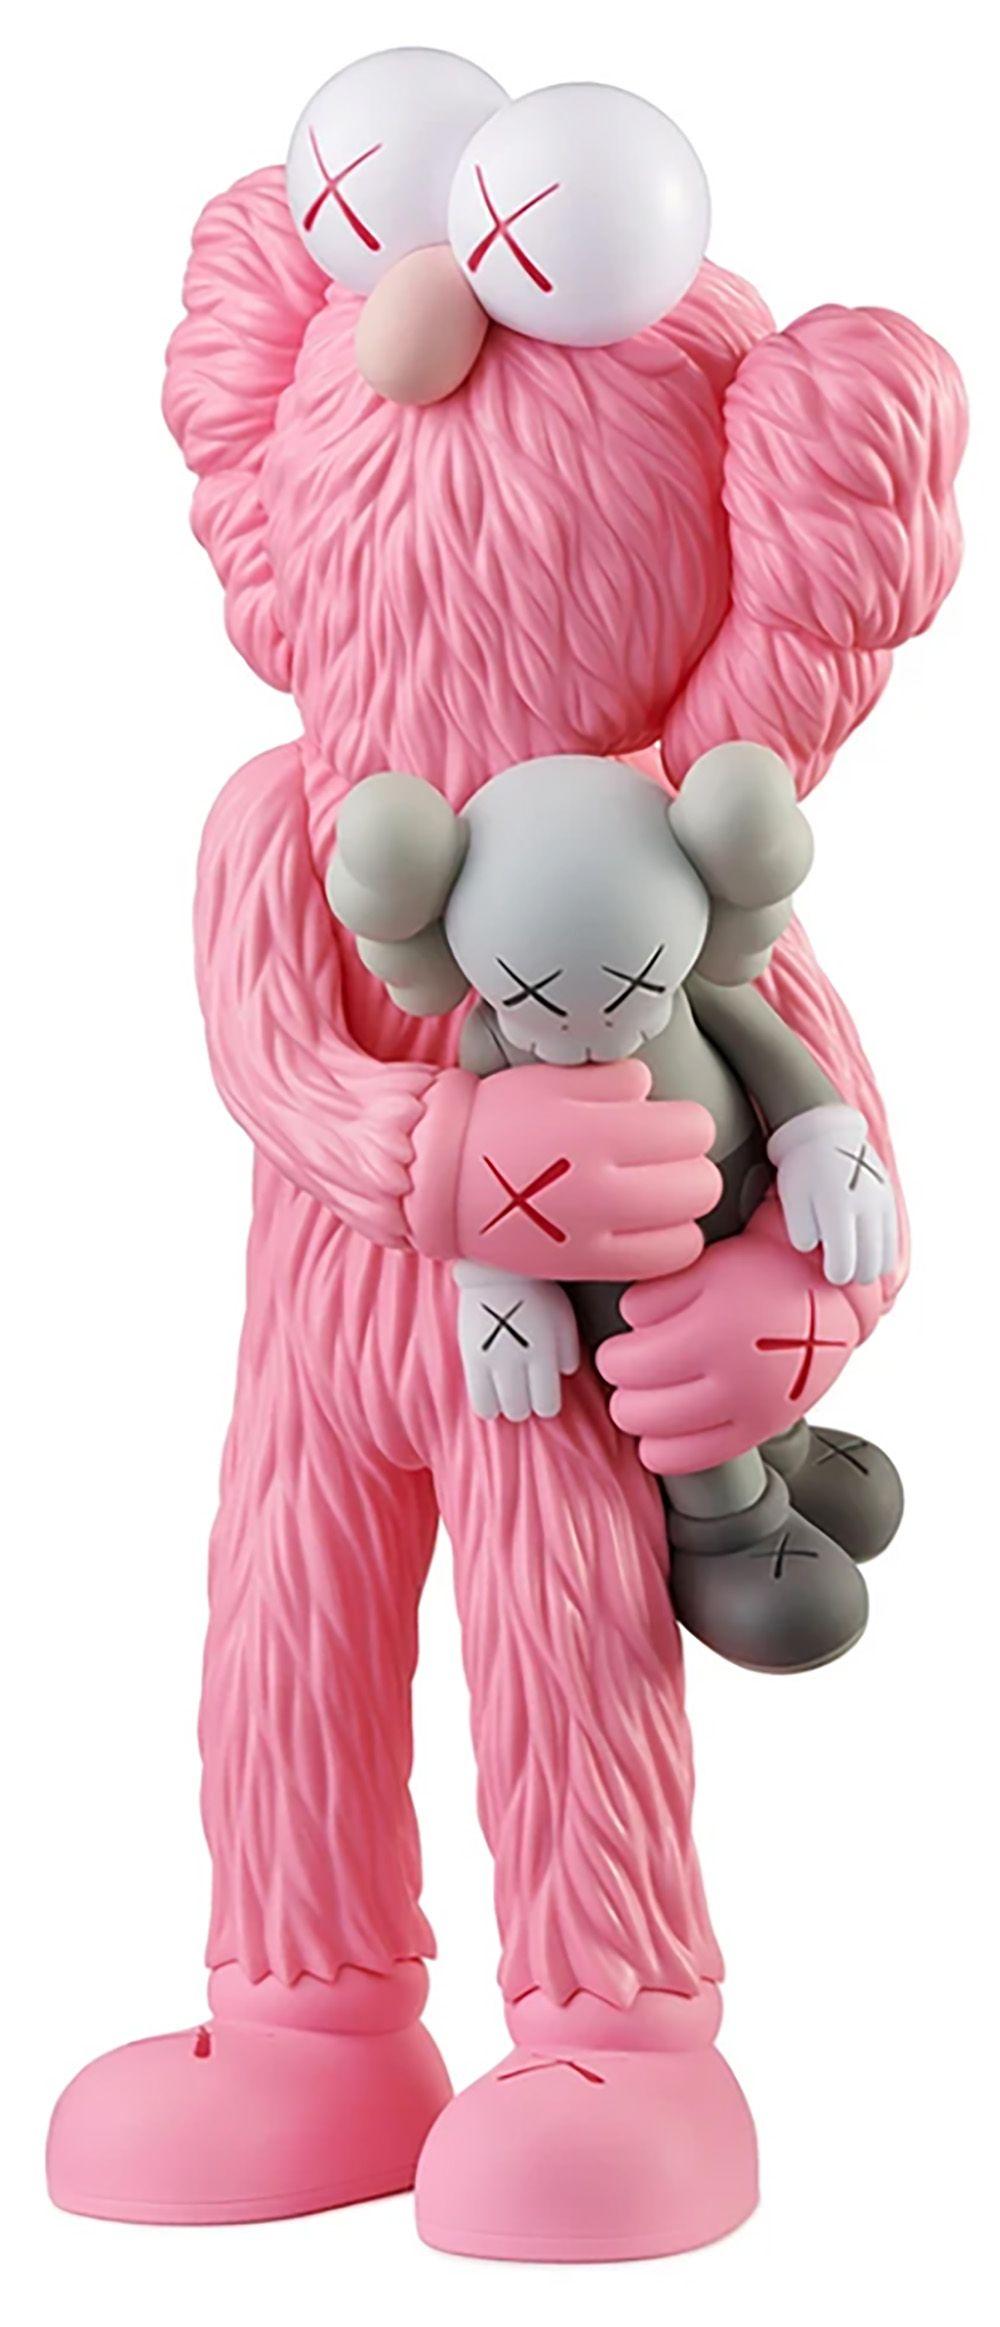 KAWS TAKE: Set of 2 Works - each new in original packaging. 
These standout KAWS figurative pieces are a variation of KAWS' large scale TAKE sculpture - a key highlight of the exhibition, 'KAWS BLACKOUT at Skarstedt Gallery London in 2019 - the